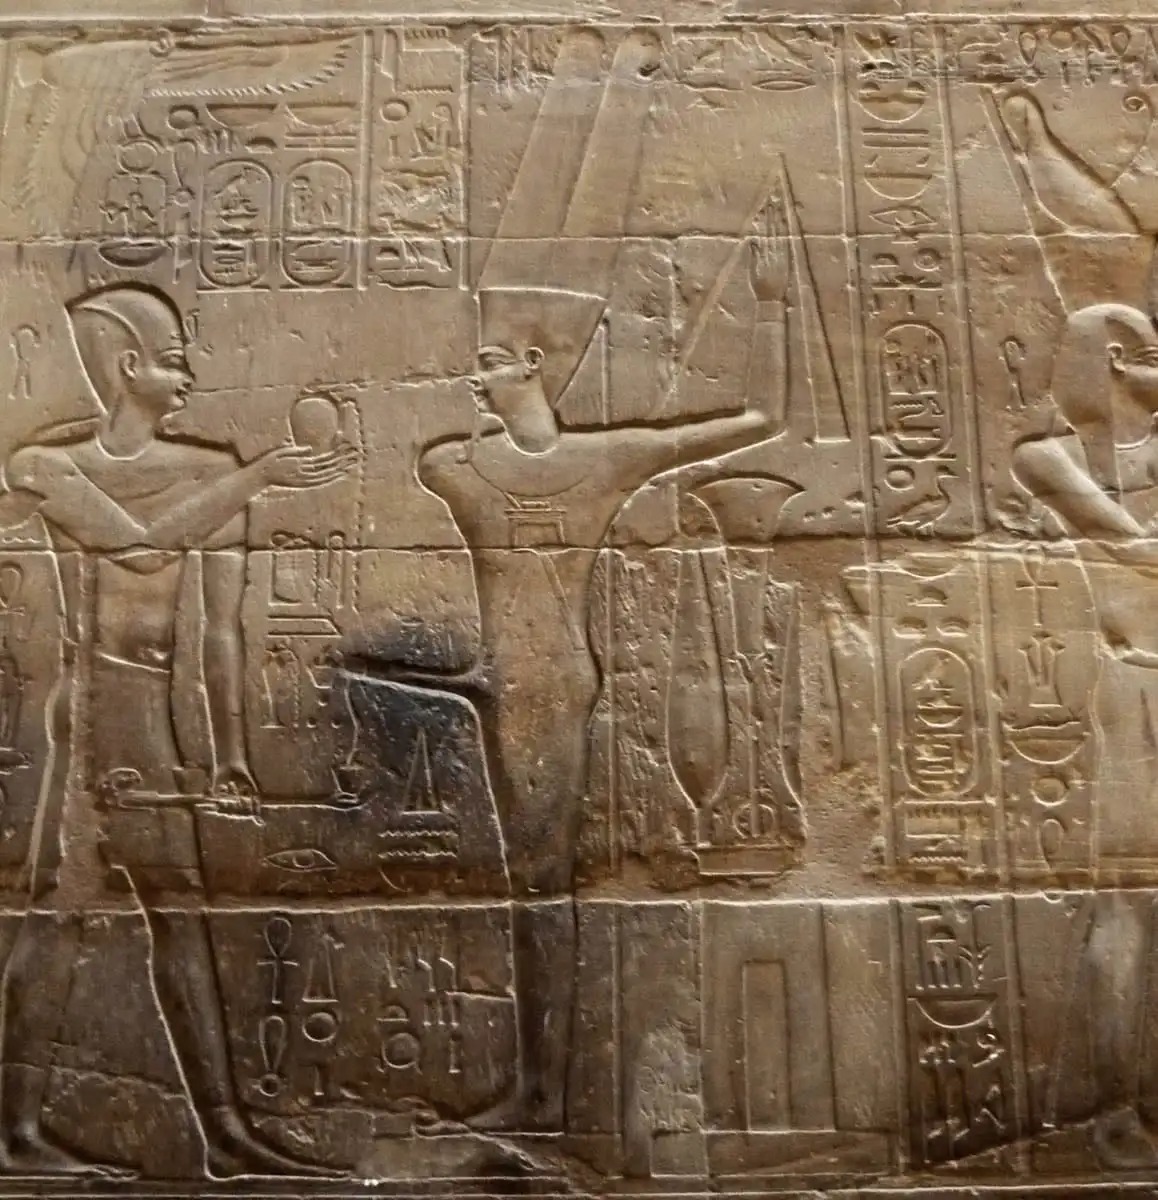 Fascinating Insights Into Ancient Egyptian Sexuality Uncover Surprising Aspects Beyond The